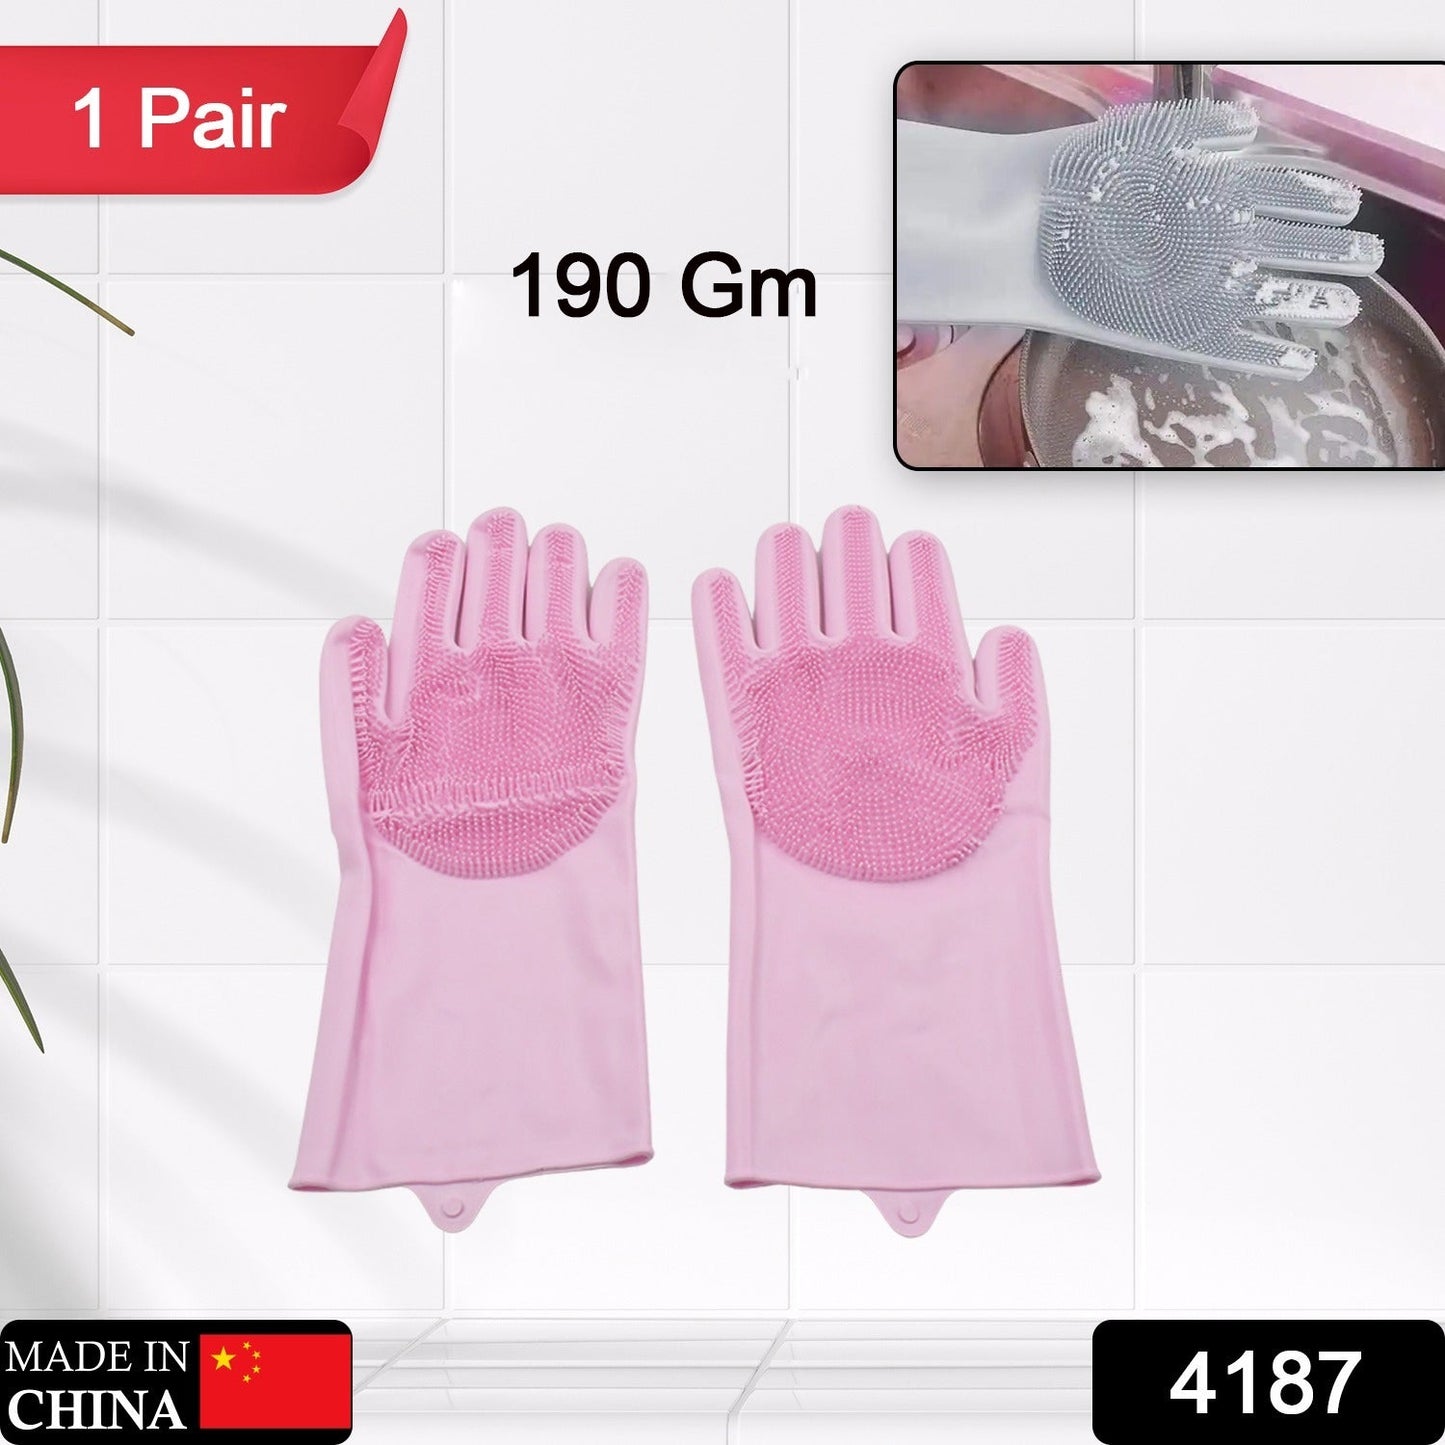 4187 Dishwashing Gloves with Scrubber| Silicone Cleaning Reusable Scrub Gloves for Wash Dish Kitchen| Bathroom| Pet Grooming Wet and Dry Glove (1 Pair , 196Gm)